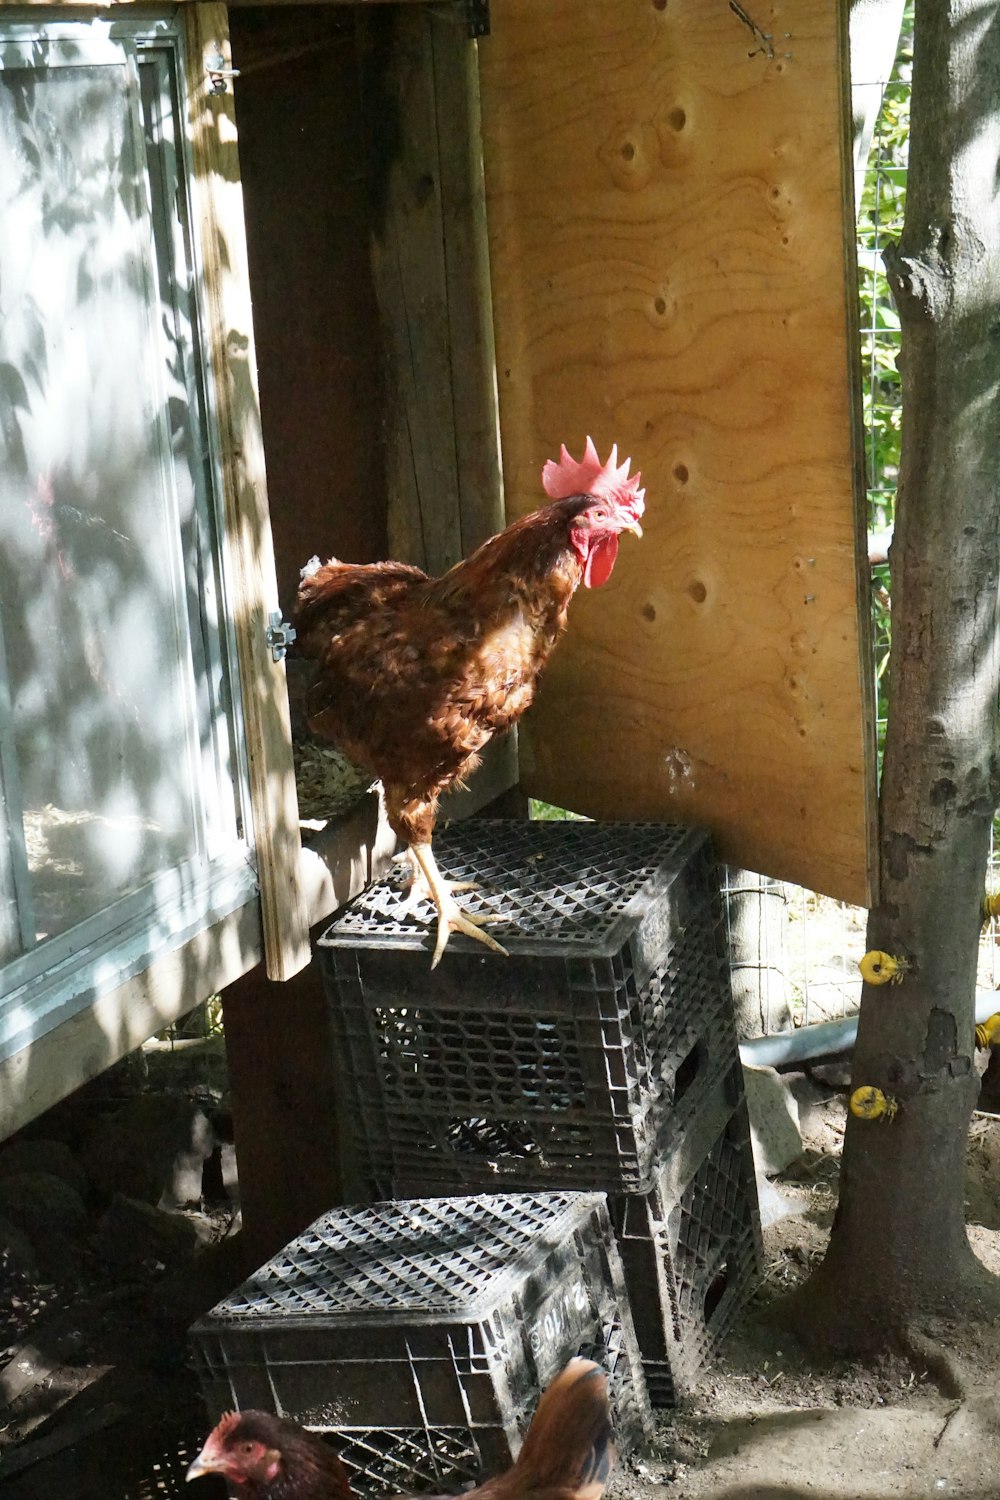 a rooster standing on a grill